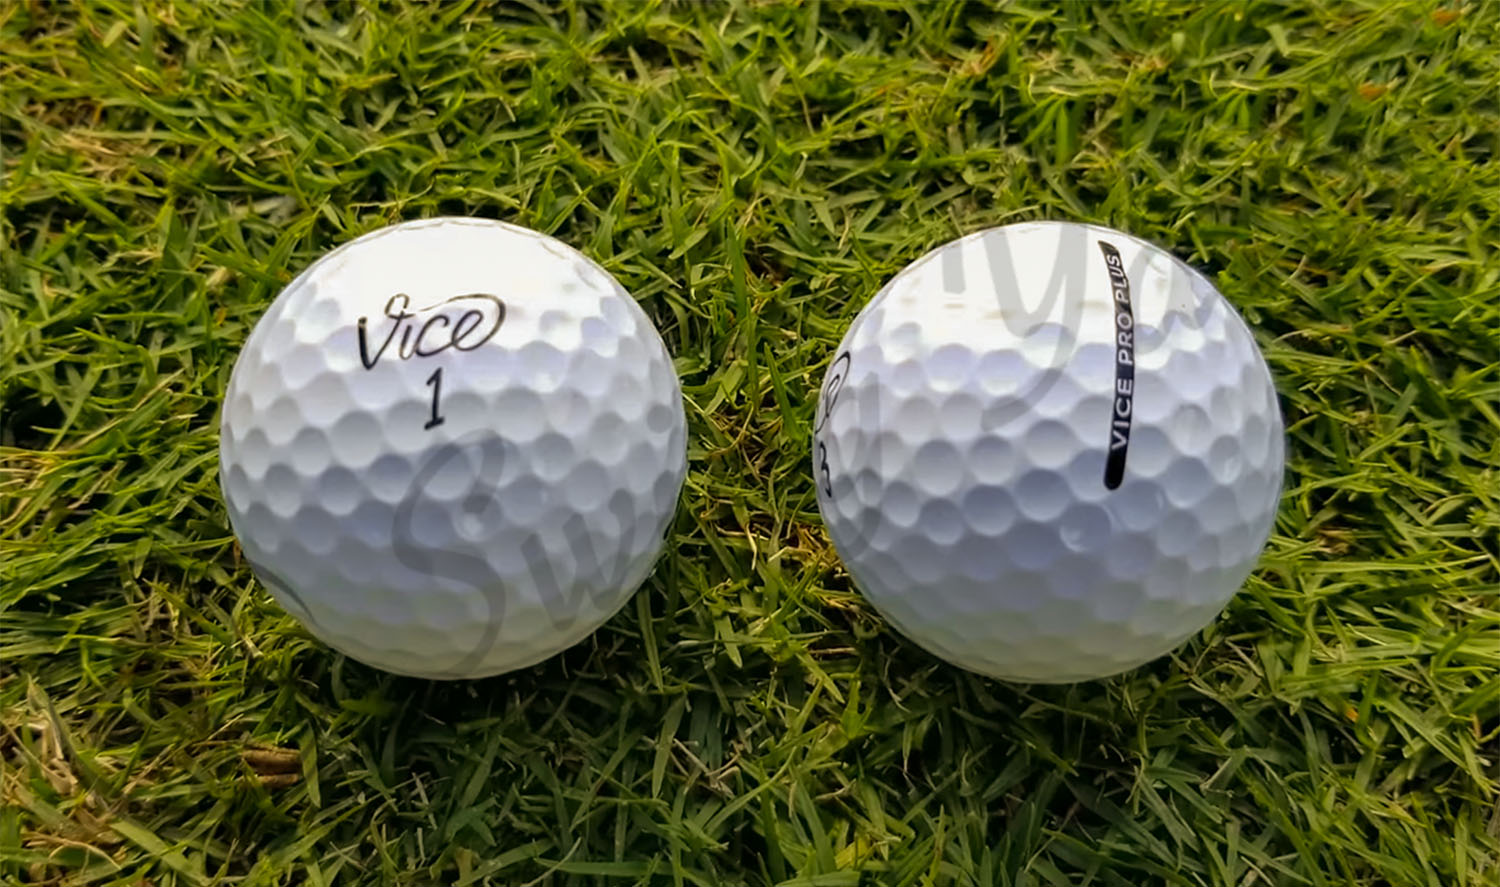 A Vice Pro Plus balls in the grass at the golf course